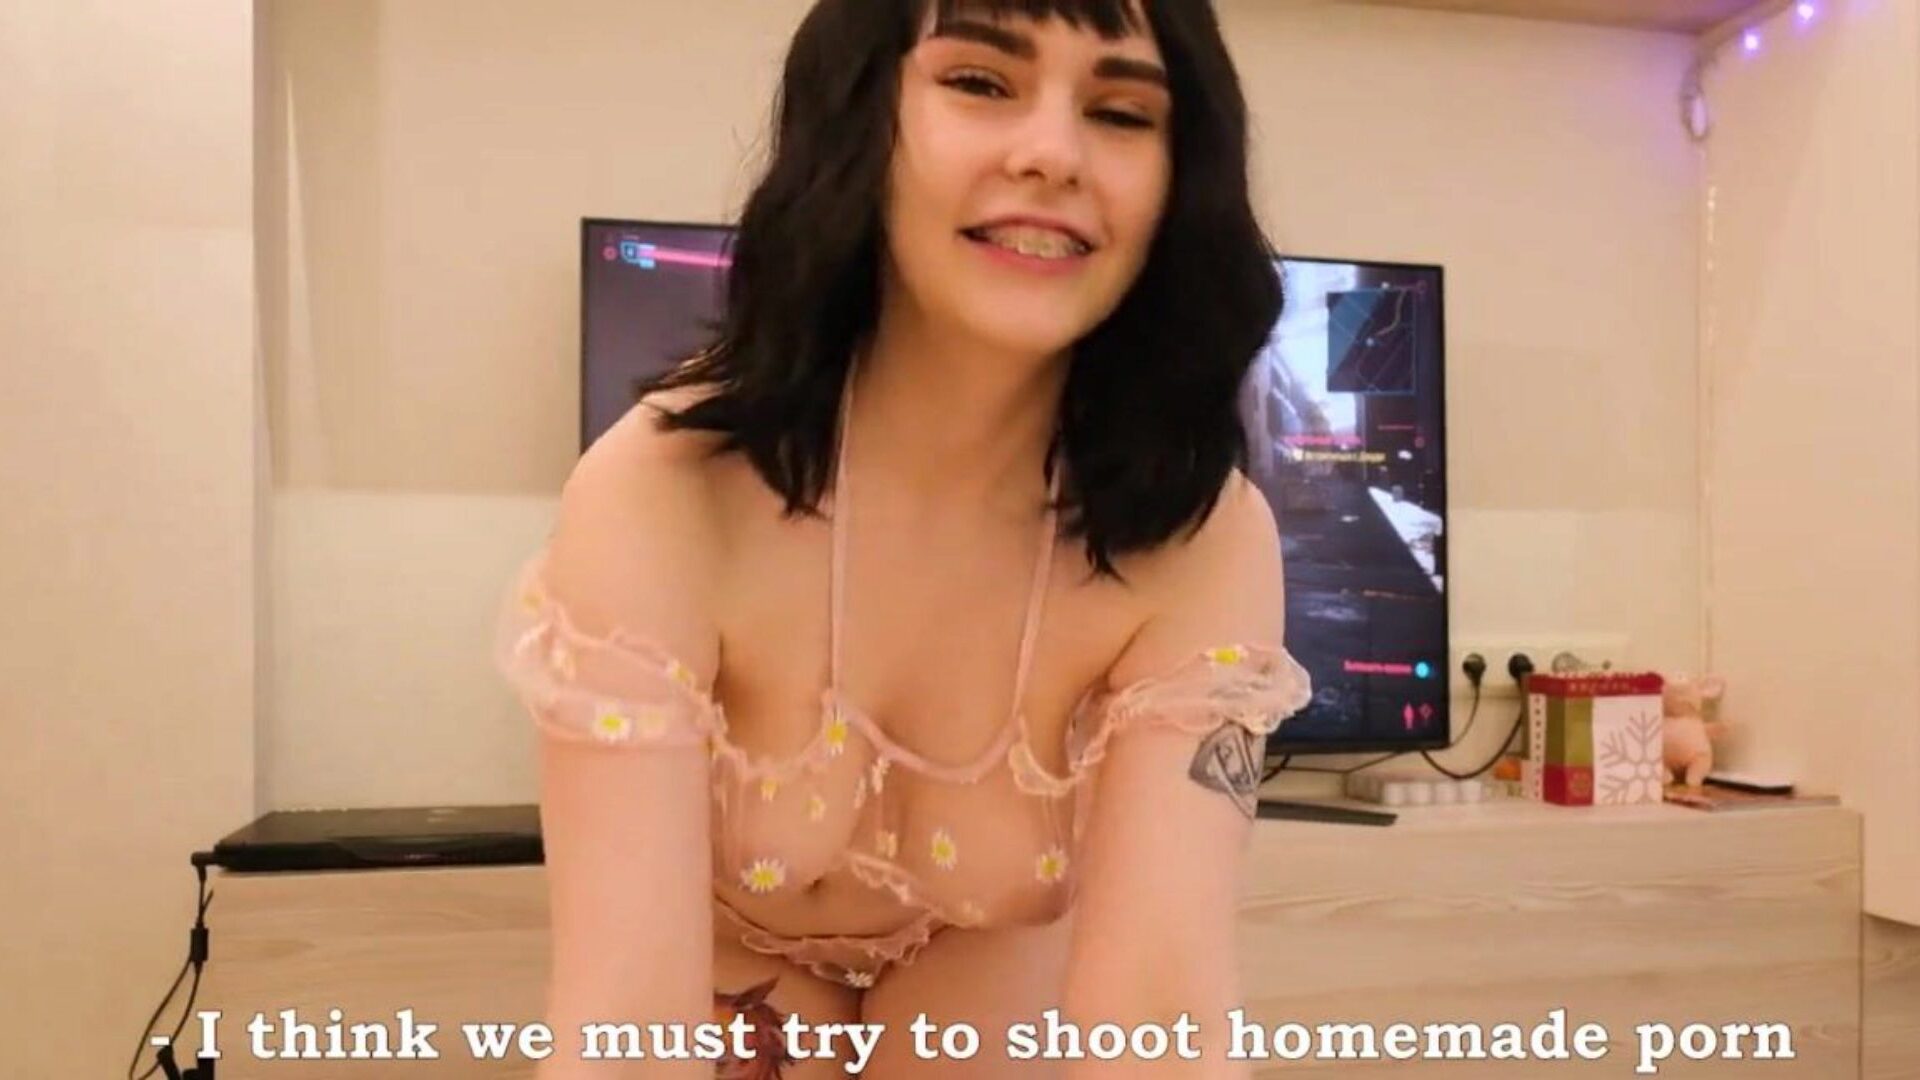 My Busty Girlfriend Wants to Shoot Our Sex: Free HD Porn c9 Watch My Busty Girlfriend Wants to Shoot Our Sex clip on xHamster - the ultimate database of free Russian Sex Online HD gonzo porno tube episodes